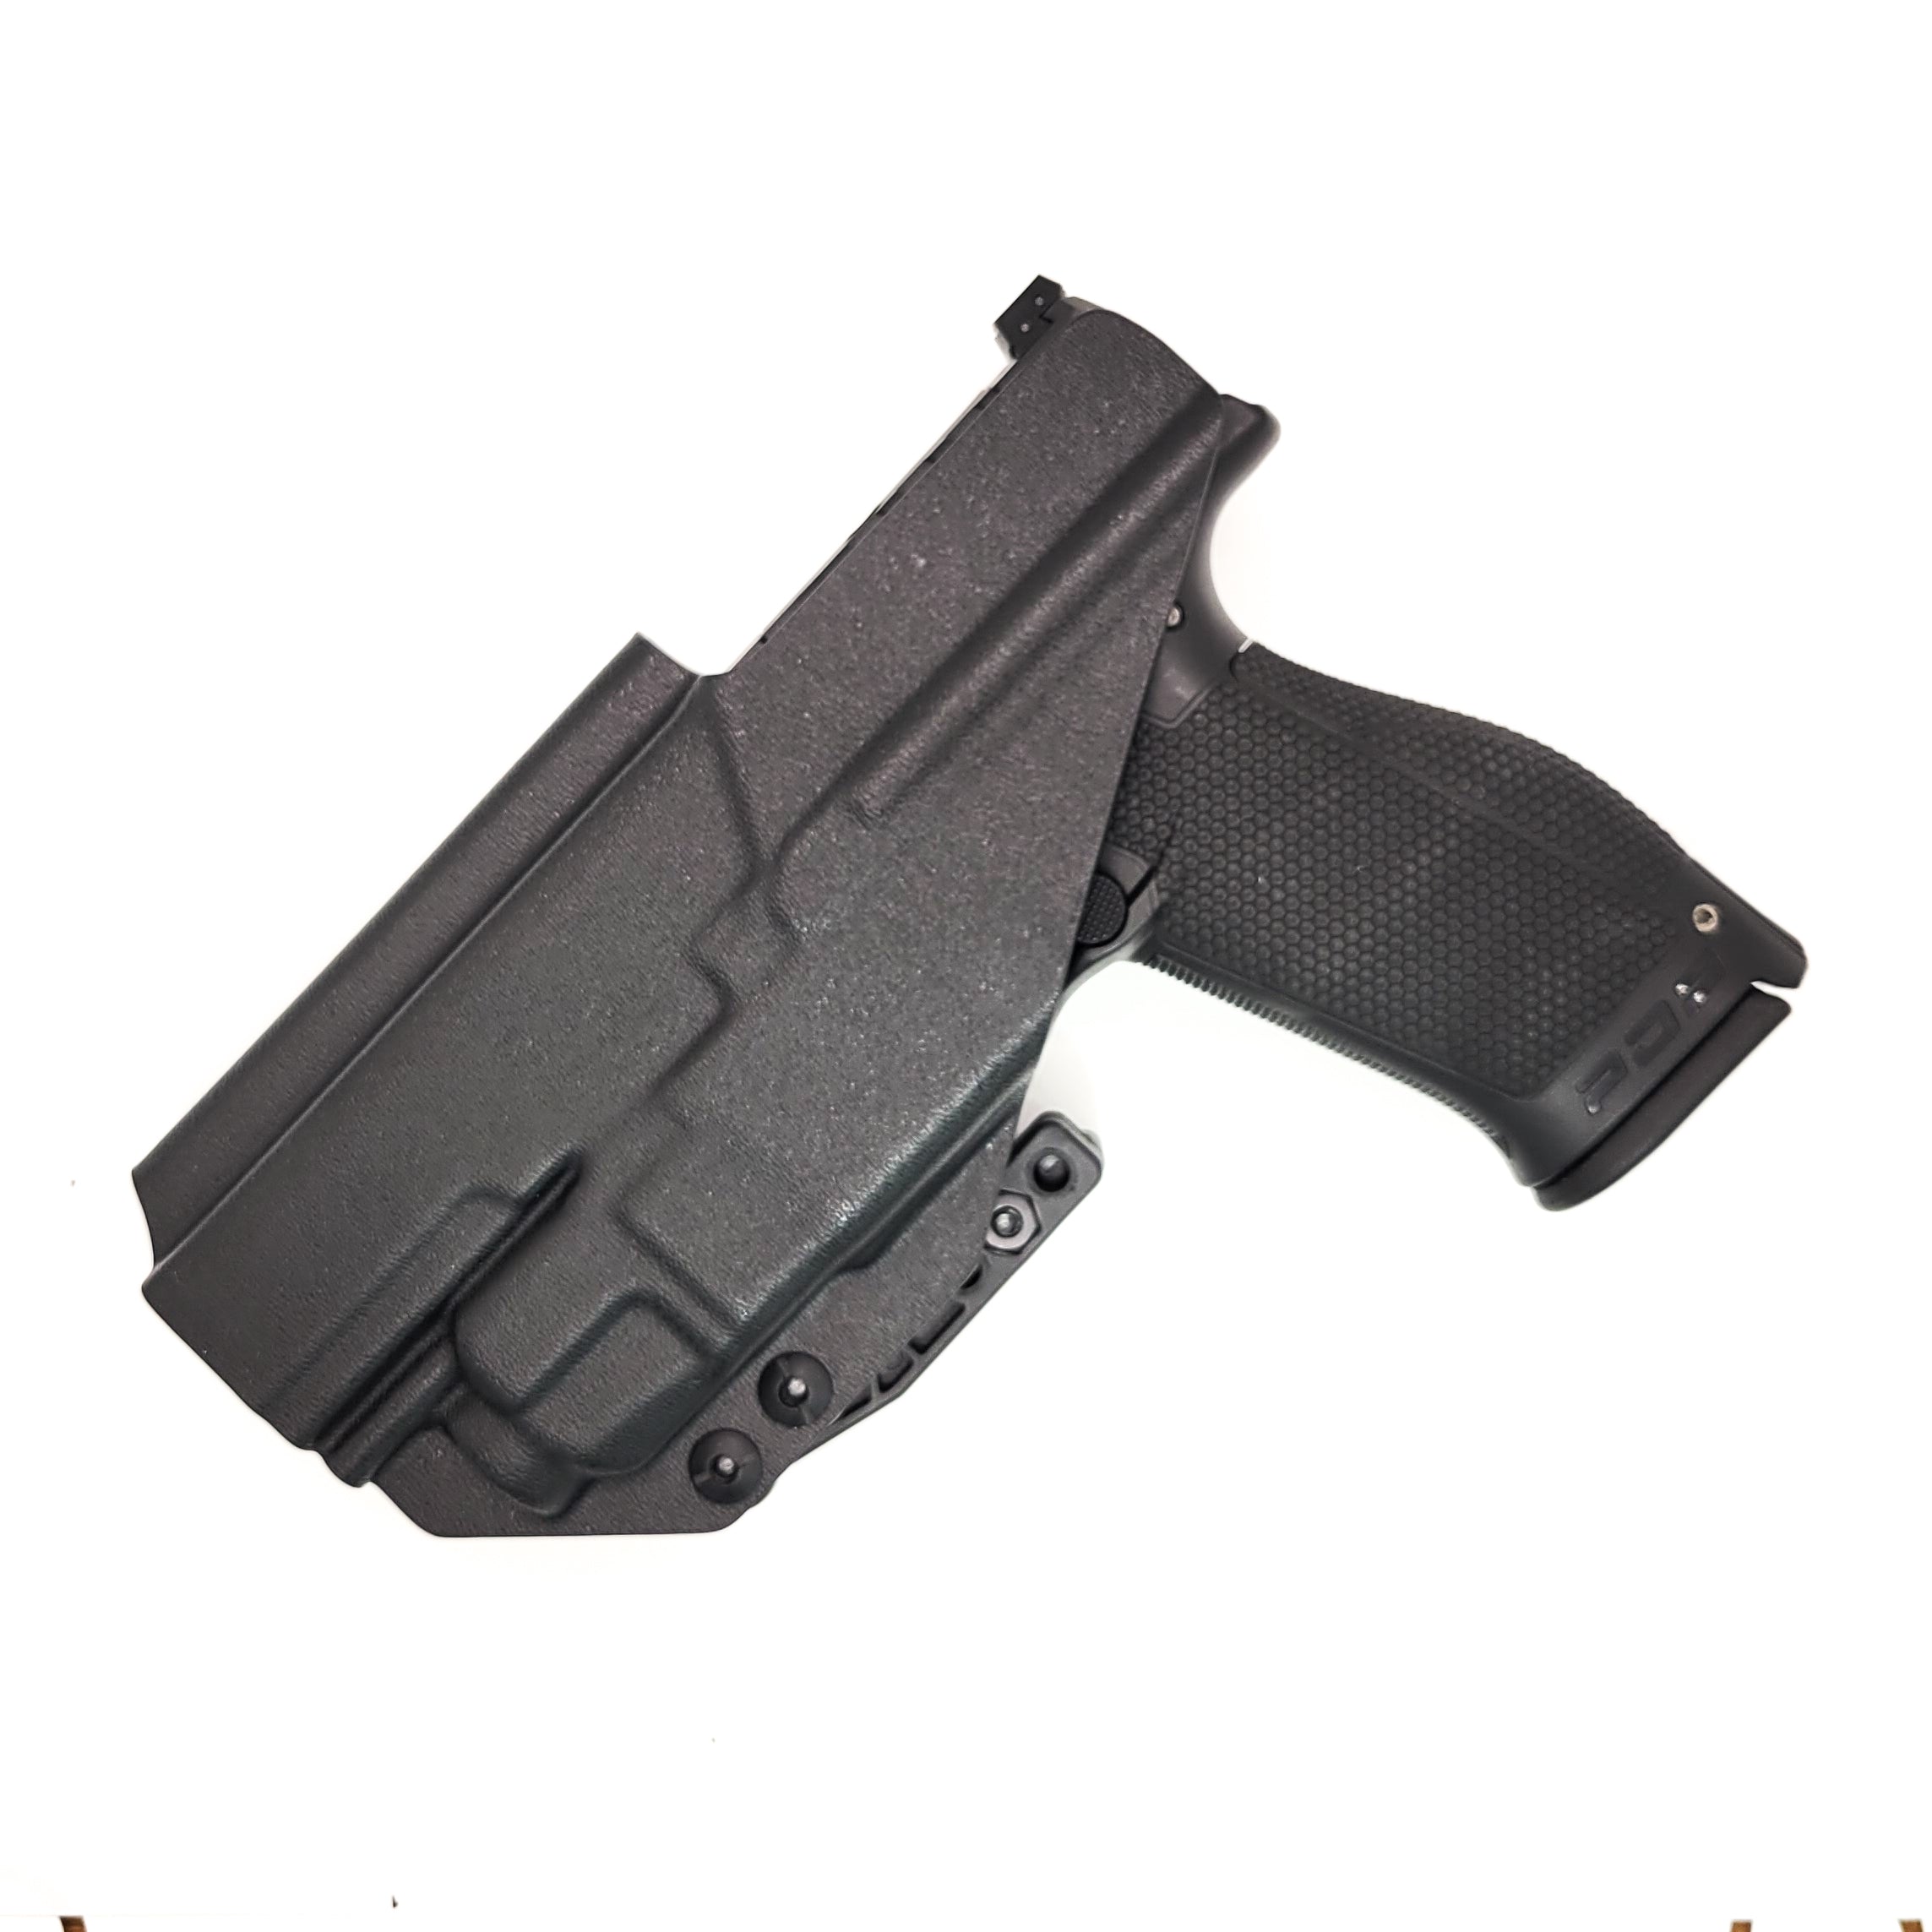 For the best concealed carry Inside Waistband IWB AIWB Holster designed to fit the Walther PDP Pro SD Compact 4.6" pistol with a 4" slide and 4.6" threaded barrel and Streamlight TLR-7A or TLR-7 mounted on the firearm, shop Four Brothers Holsters. Cut for red dot sight, full sweat guard, adjustable retention & open muzzle.  